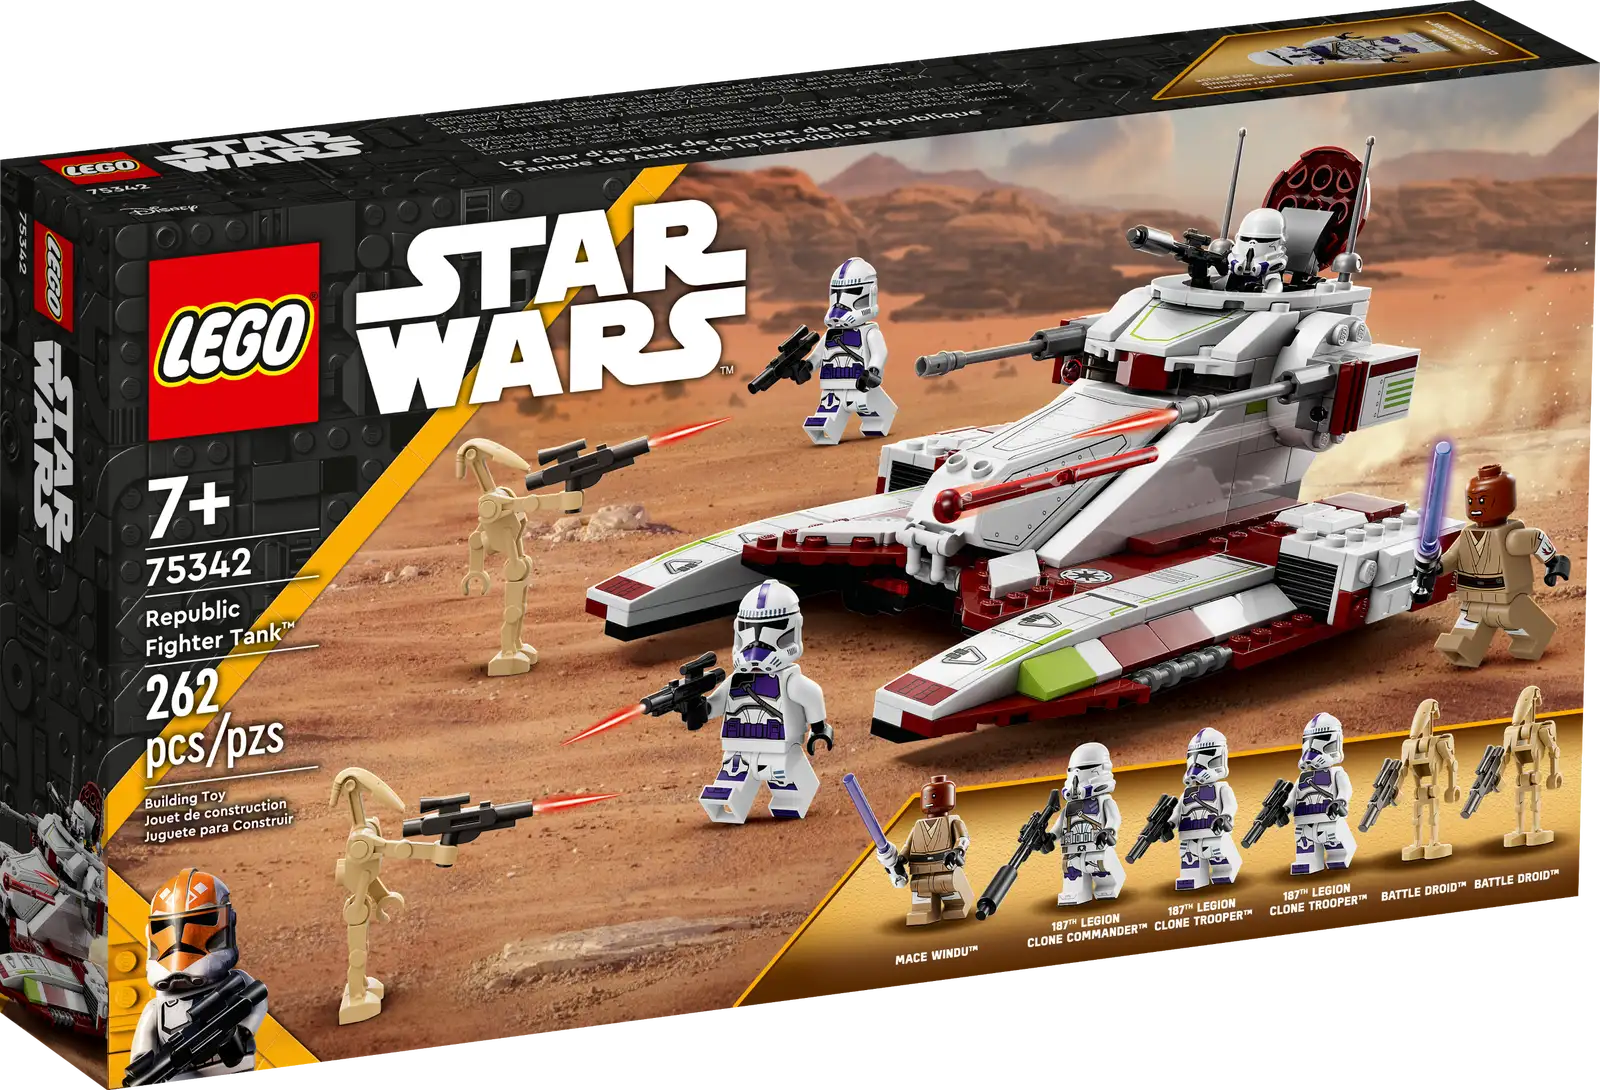 Star Wars: The Clone Wars fans can play out exciting clashes between Mace Windu’s 187th Legion Clone Troopers and the Battle Droids with this LEGO® brick-built Republic Fighter Tank (75342). It features hidden wheels for a hover effect, 2 elevating spring-loaded shooters and a lookout for the Clone Commander on top. There are 4 LEGO minifigures in the set: Mace Windu and new-for-May-2022 versions of the 187th Legion Clone Commander and Troopers, plus 2 Battle Droids – all with cool weapons. Gift idea for kids aged 7 and up Thinking of buying this awesome building toy as a gift for a Star Wars™ fan who is new to LEGO sets? No worries – step-by-step instructions are included to guide their fun, creative journey. Galaxy of choice The LEGO Group has been recreating iconic starships, vehicles, locations and characters from the Star Wars universe since 1999. LEGO Star Wars has become its most successful theme with a wide variety of buildable models to excite people of all ages. LEGO® Star Wars™ buildable tank toy playset (75342) – Fans can help Mace Windu and his 187th Legion Clone Troopers in Star Wars: The Clone Wars defeat the Battle Droids with this Republic Fighter Tank 6 LEGO® minifigures/figures for role play – Mace Windu with a lightsaber, 187th Legion Clone Commander with a blaster rifle, plus 2 187th Legion Clone Troopers and 2 Battle Droids, each with blasters Built for action play – The tank has hidden wheels for a hover effect, 2 elevating spring-loaded shooters, a minifigure cockpit, a lookout for the Clone Commander, and a rear hatch Gift idea for ages 7 and up – This 262-piece building toy makes a fun holiday gift, birthday present or surprise treat for creative kids who are into Star Wars: The Clone Wars Build, play and display – This buildable TX-130 Saber-class fighter tank model measures over 4 in. (10 cm) high, 8 in. (20 cm) long and 6 in. (16 cm) wide Illustrated instructions – A step-by-step guide is included so even young Star Wars™ fans who are newcomers to LEGO® sets can build with confidence Fun construction toys for all ages – LEGO® Star Wars™ sets enable kids and adult Star Wars fans to recreate iconic scenes, role-play their own creative stories or simply display the brick-built models Quality assurance – LEGO® components meet stringent industry standards, ensuring a simple, secure connection every time Safety first – LEGO® components are dropped, heated, crushed, twisted and carefully analyzed to make sure that they comply with rigorous global safety standards